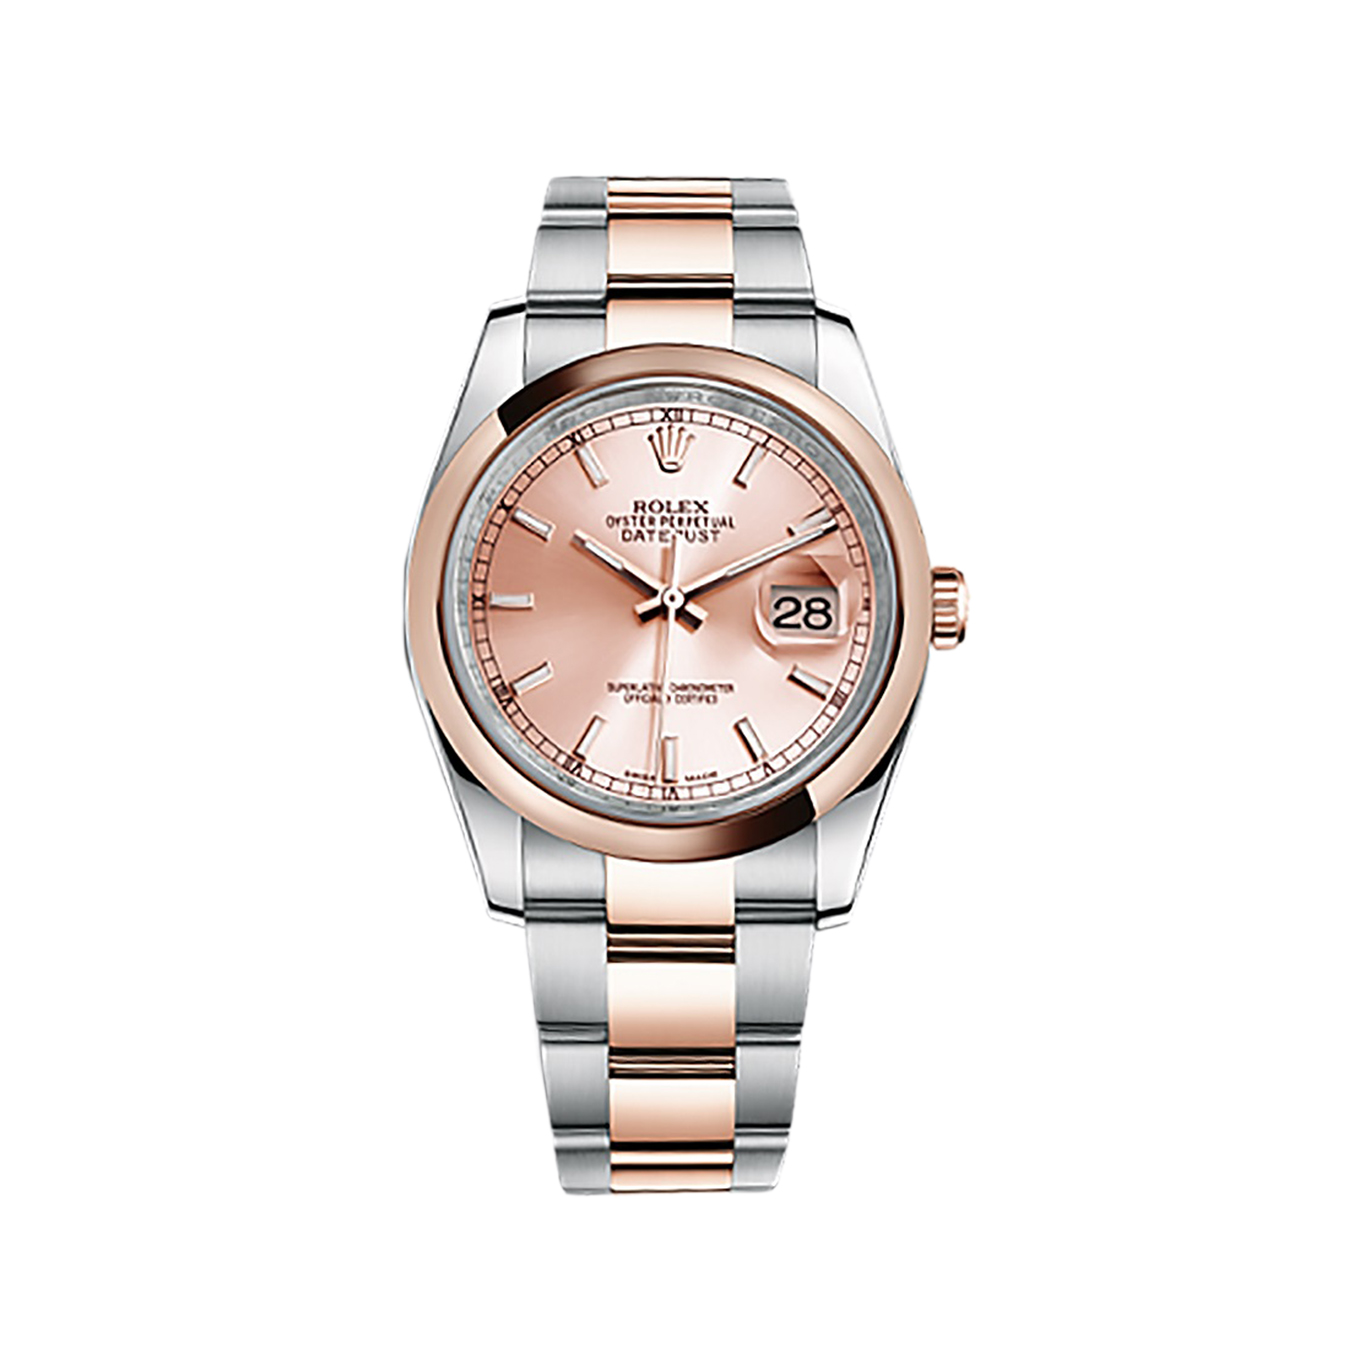 Datejust 36 116201 Rose Gold & Stainless Steel Watch (Pink) - Click Image to Close